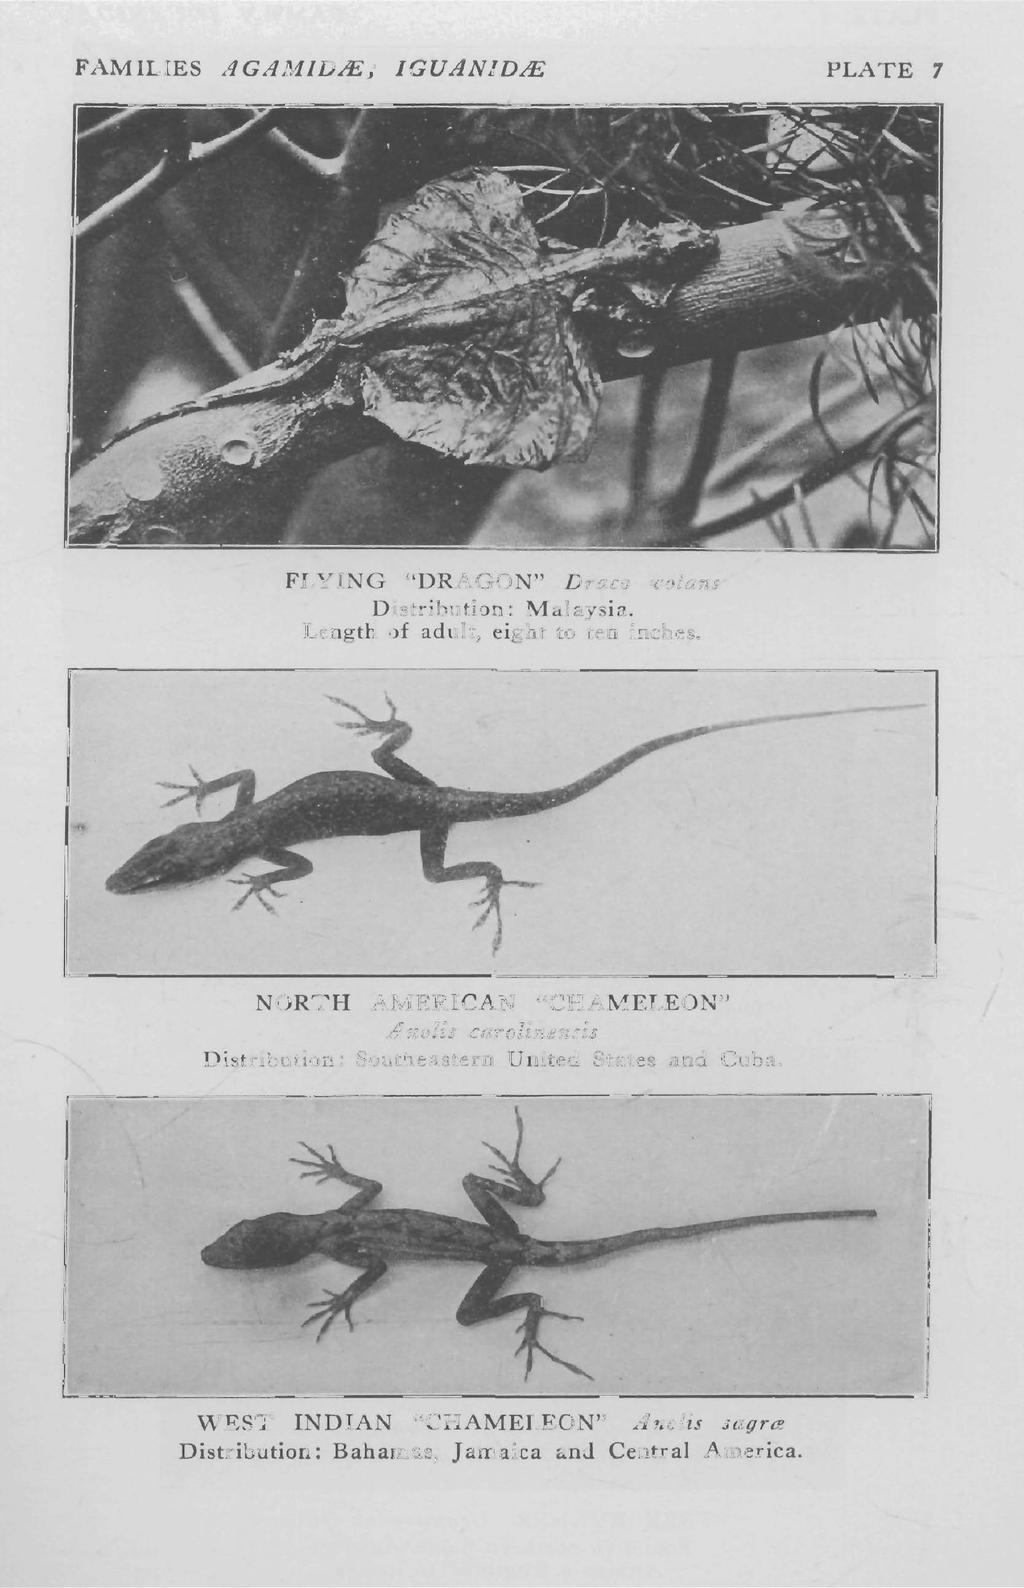 FAMILIES AGAMID.!E J ' IGUANID.!E PLATE 1 FLYING "DRAGON" Draco 'ljolans Distribution: Malaysia. Length of adult, eight to ten inches.